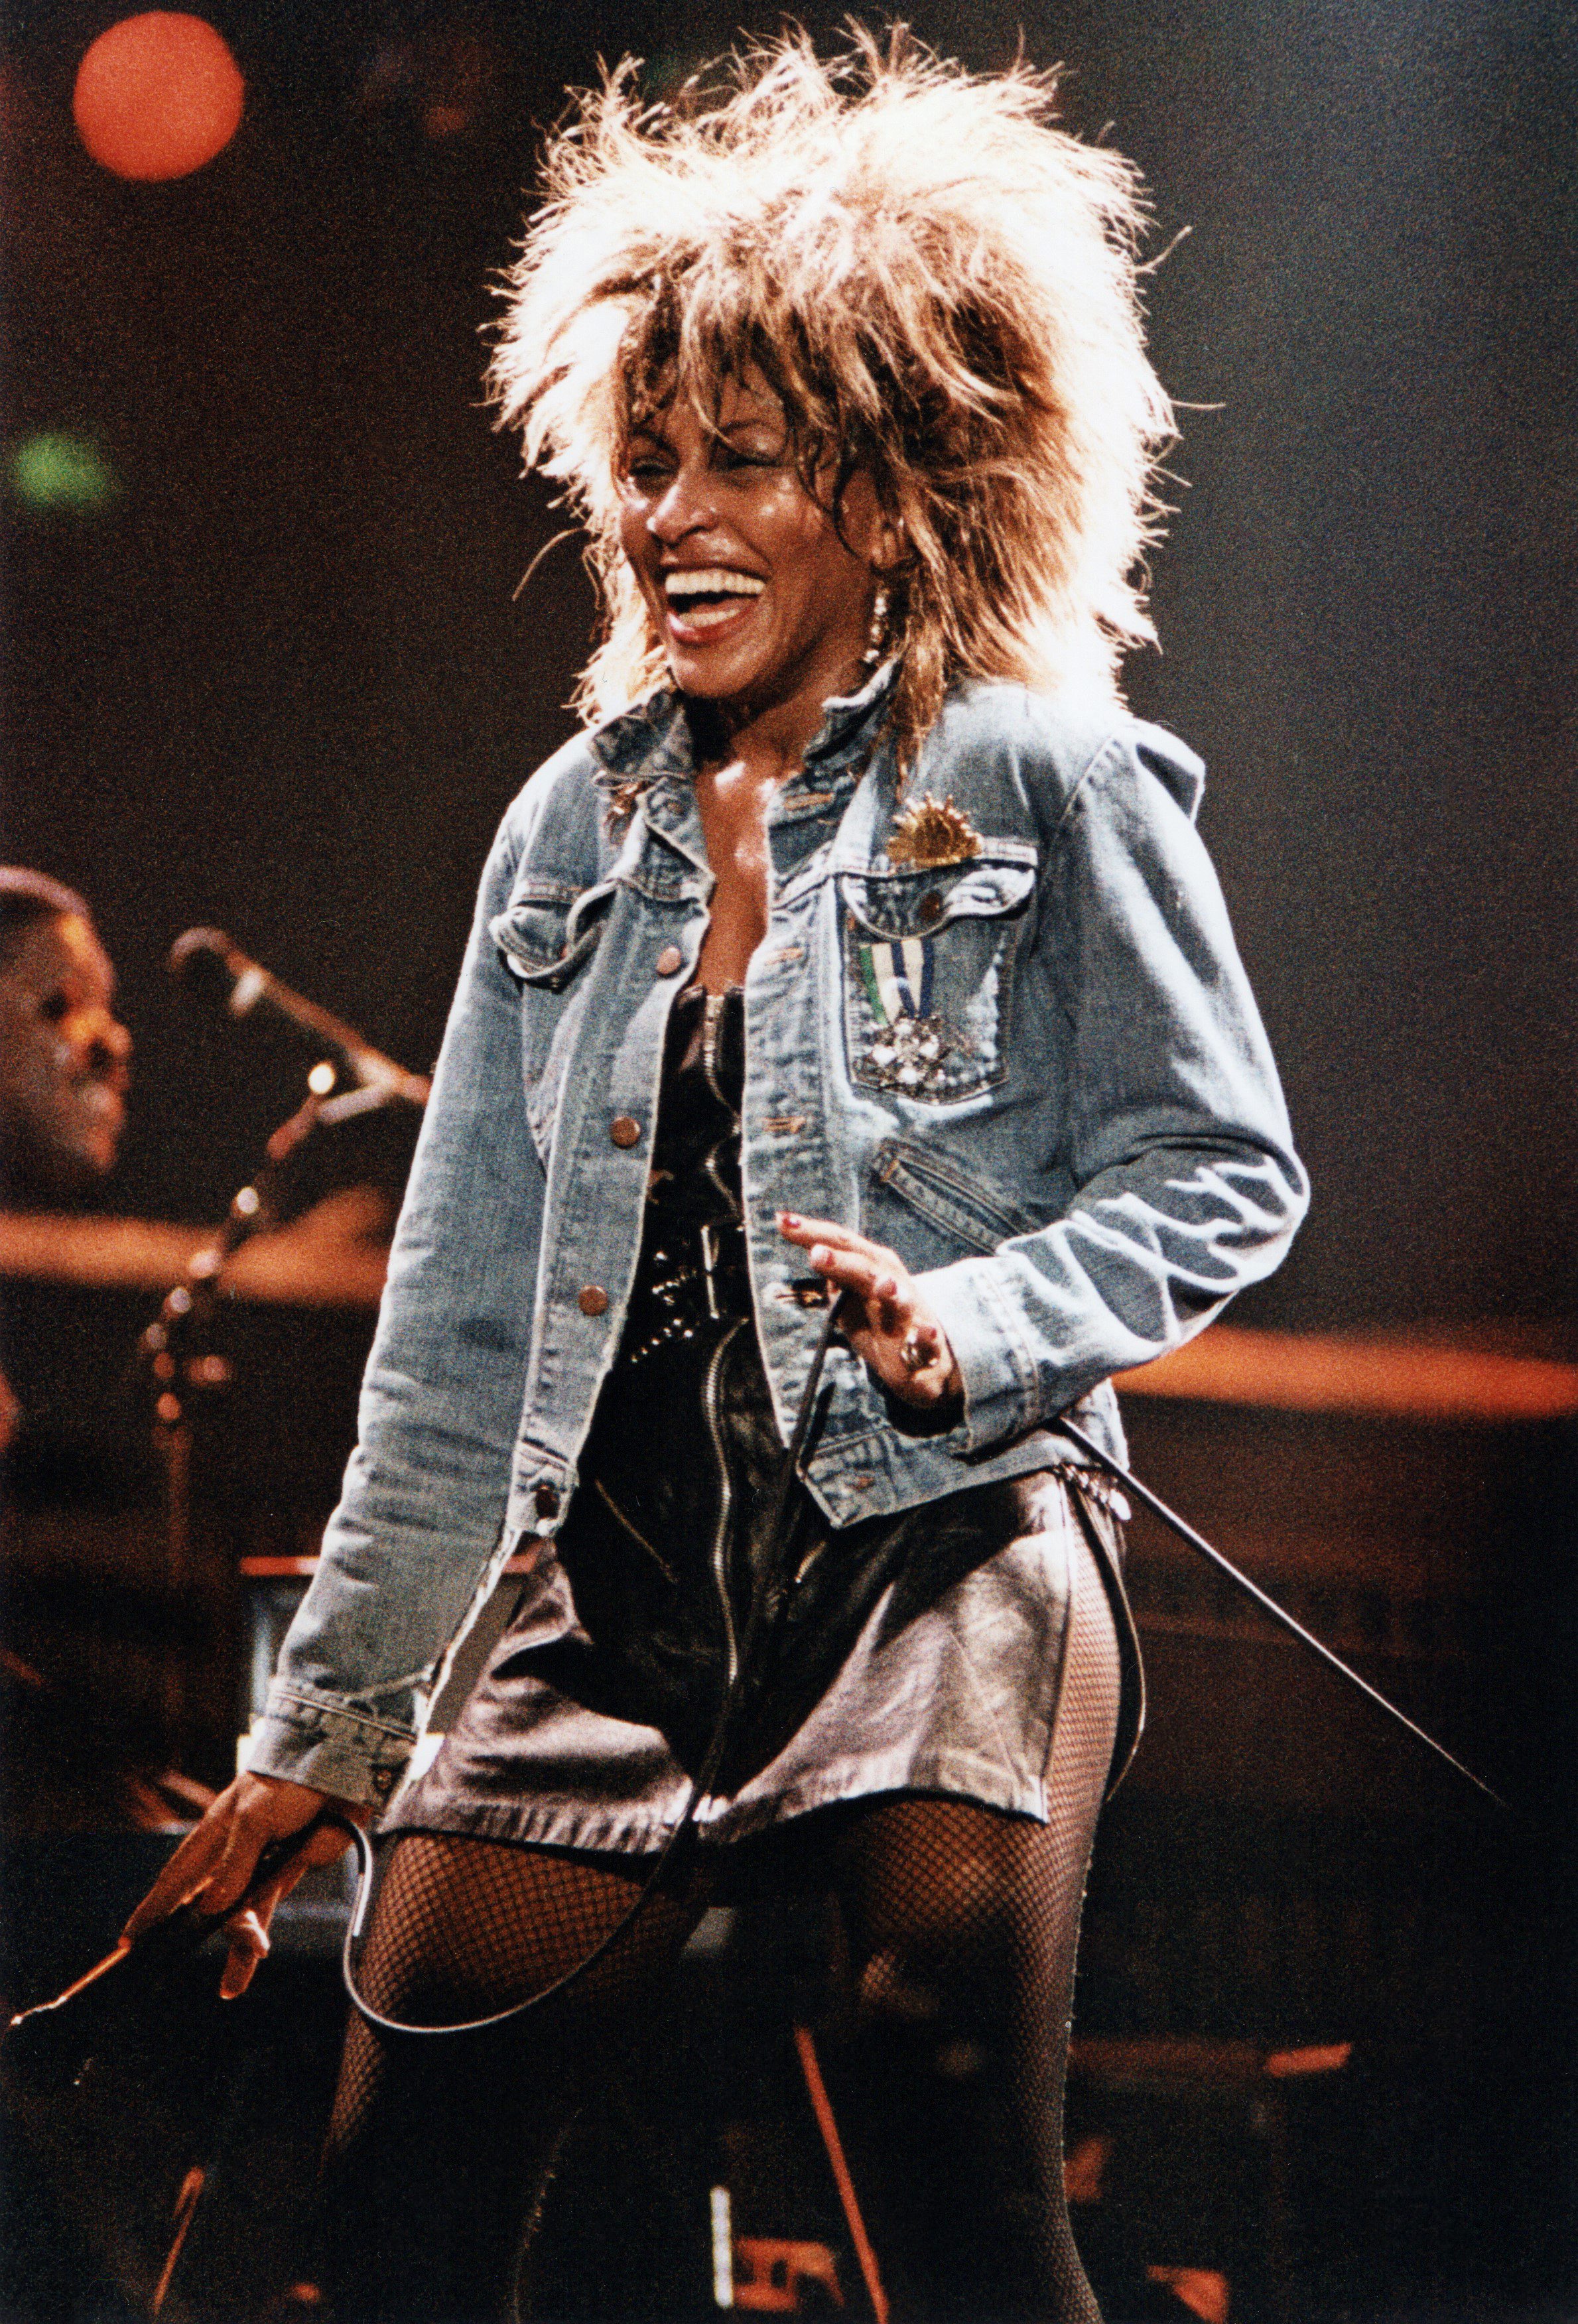 Tina Turner is pictured as she performs on stage at Wembley Arena during her 'Private Dancer' tour on March 14, 1985, in London, England | Source: getty Images